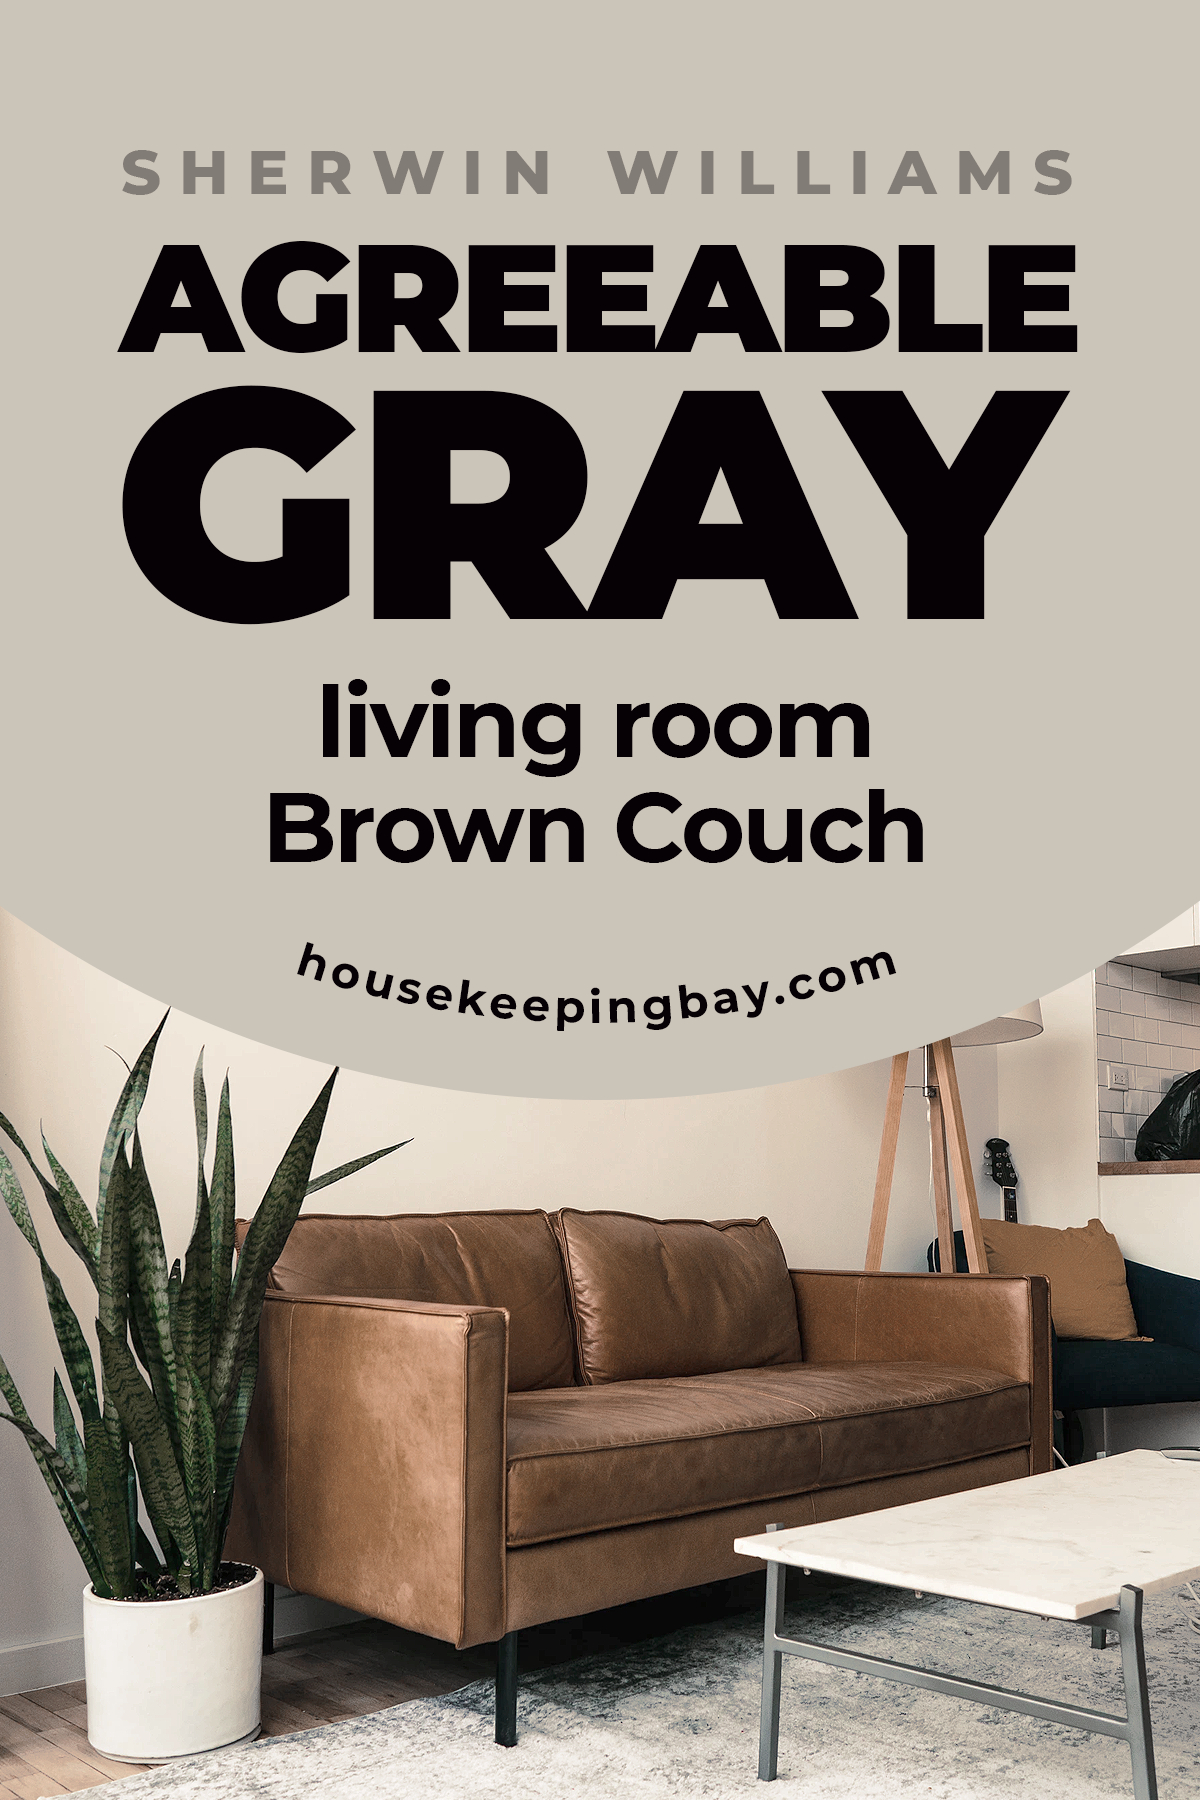 Agreeable Gray living room Brown Couch